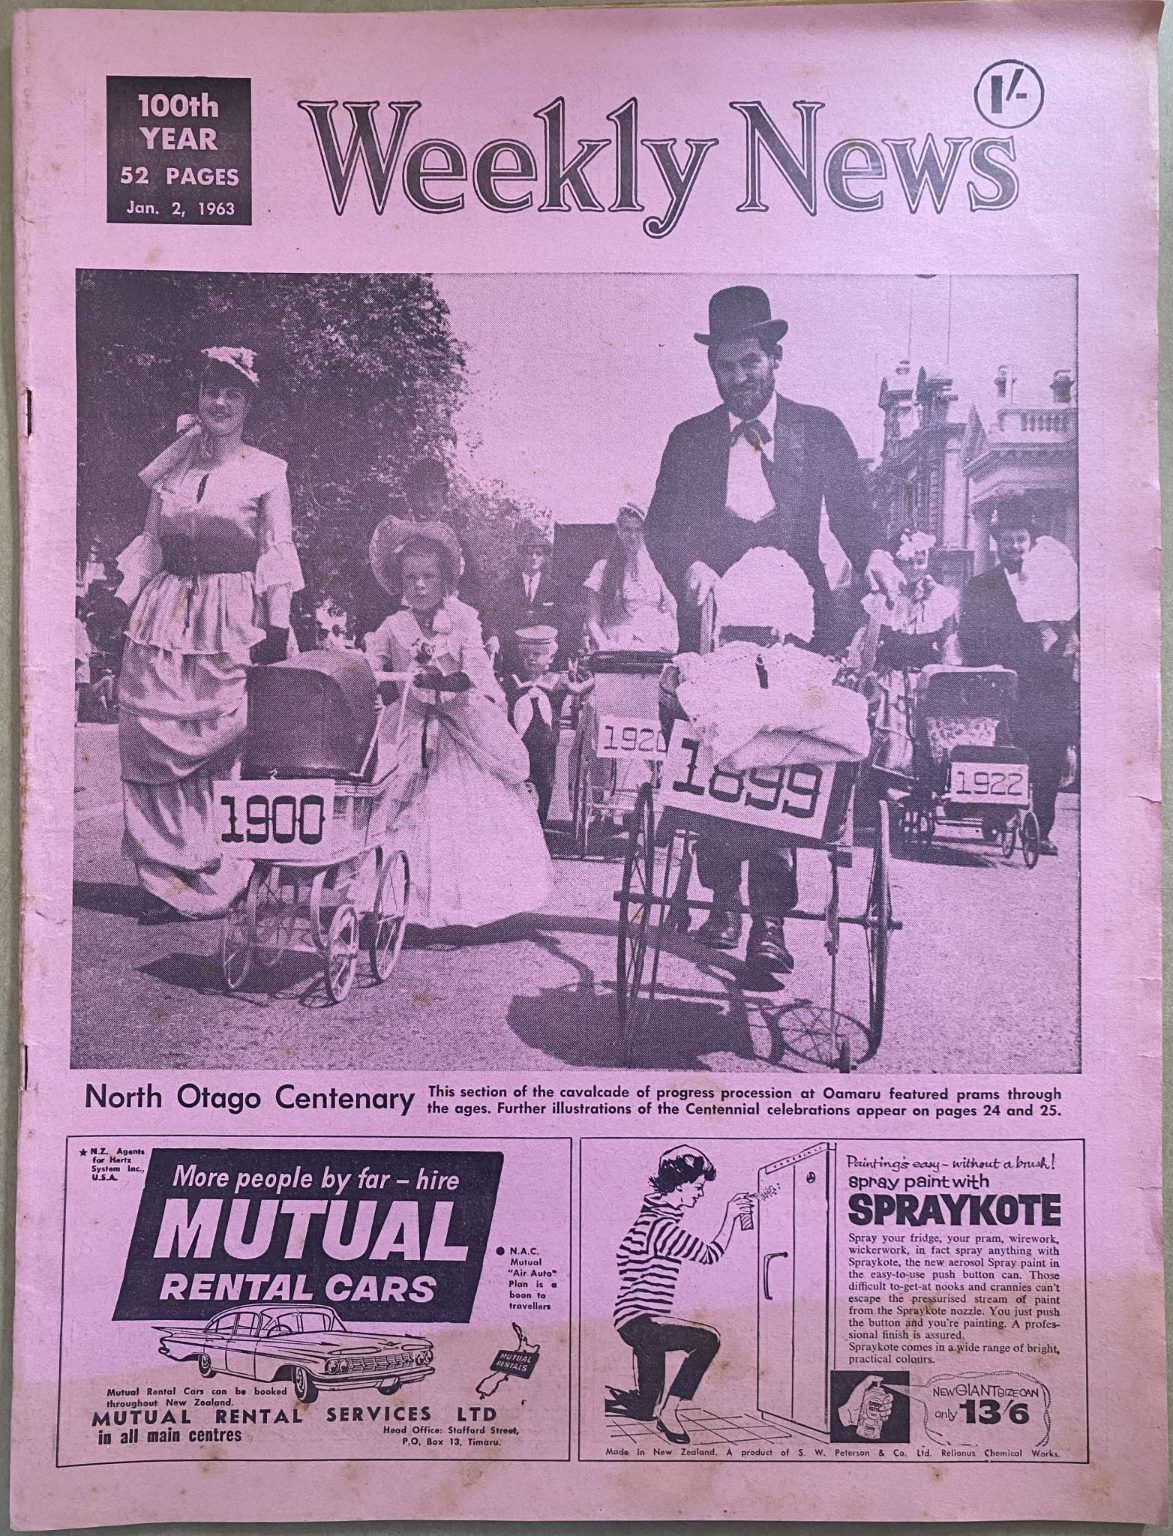 OLD NEWSPAPER: The Weekly News, 2 January 1963